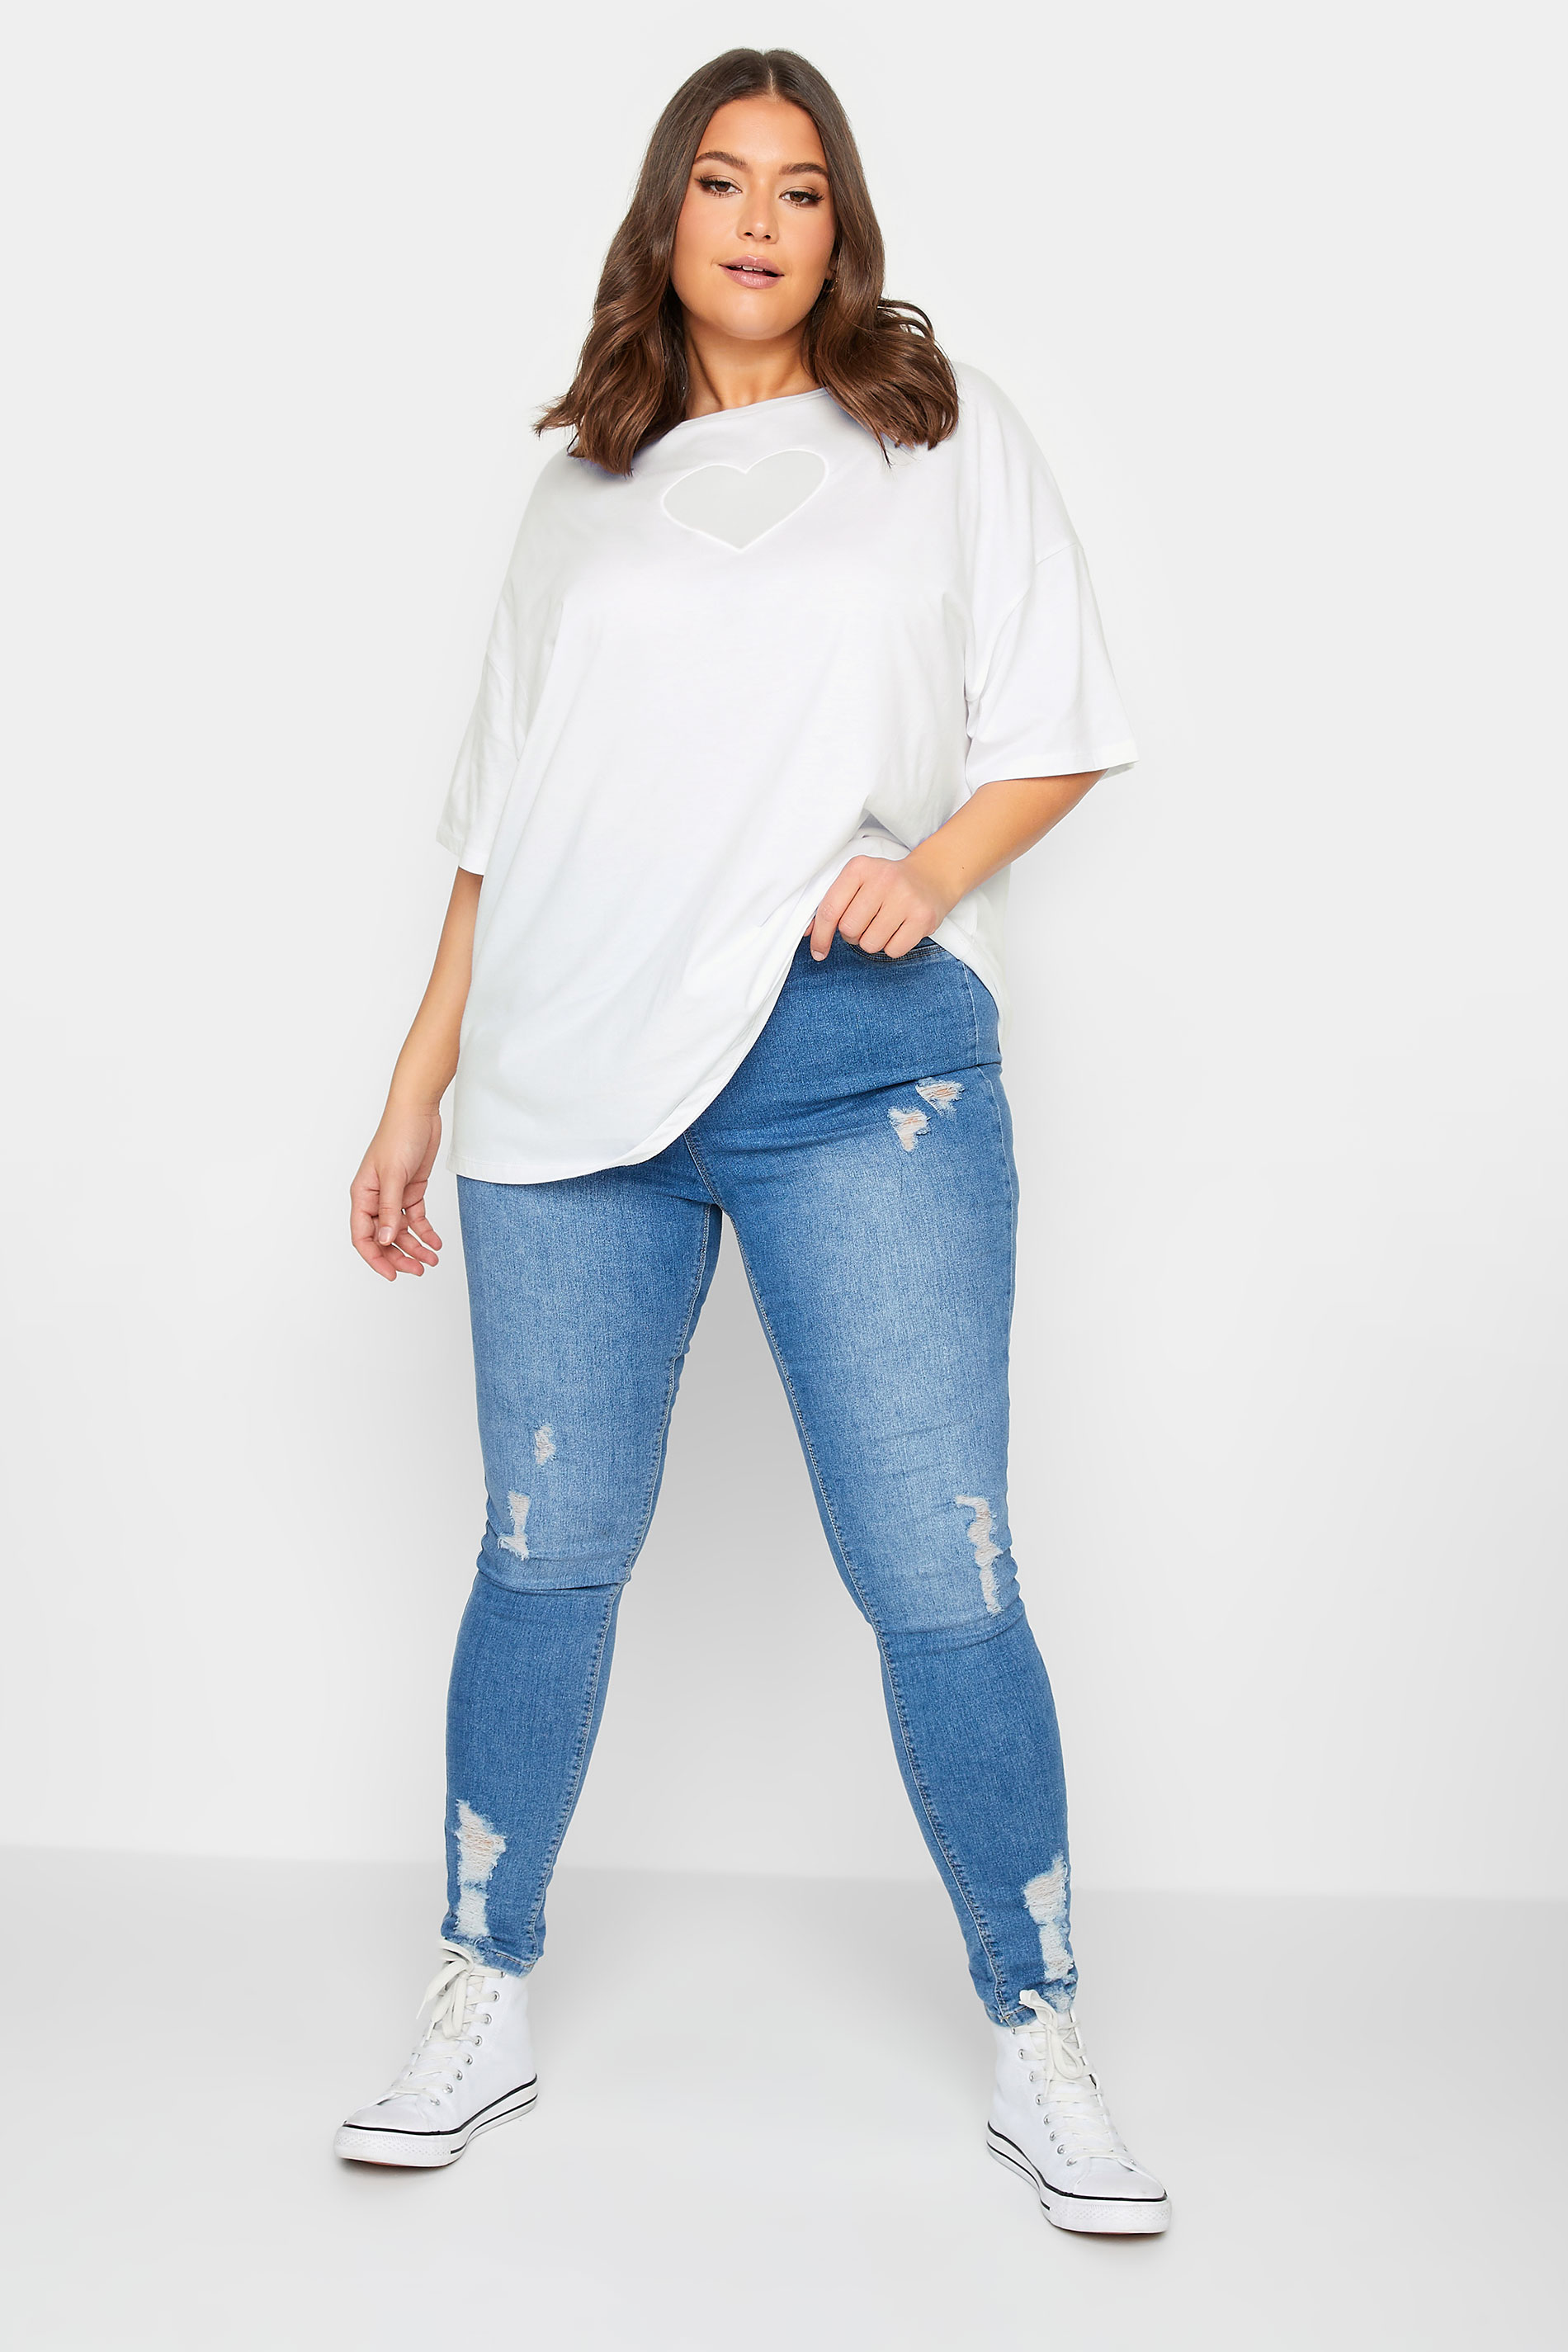 YOURS Plus Size White Heart Cut Out T-Shirt | Yours Clothing 2